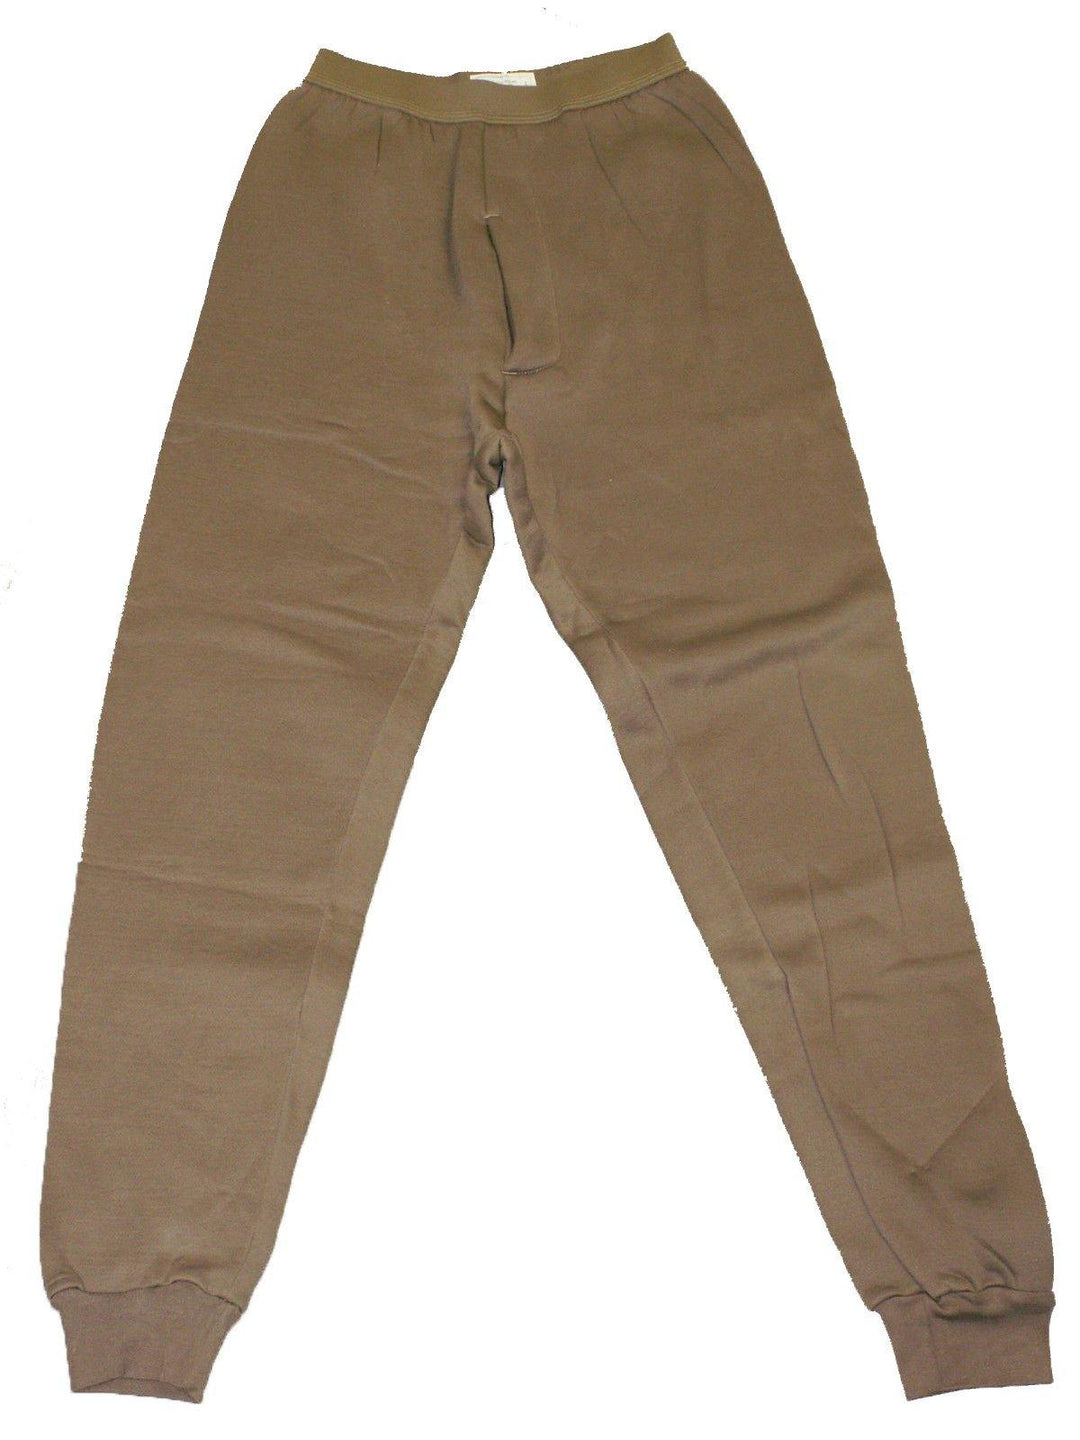 Apparel - Bottoms - Mid Layer - USGI Standard Weight Polypropylene "Poly Pro" Cold Weather Drawers